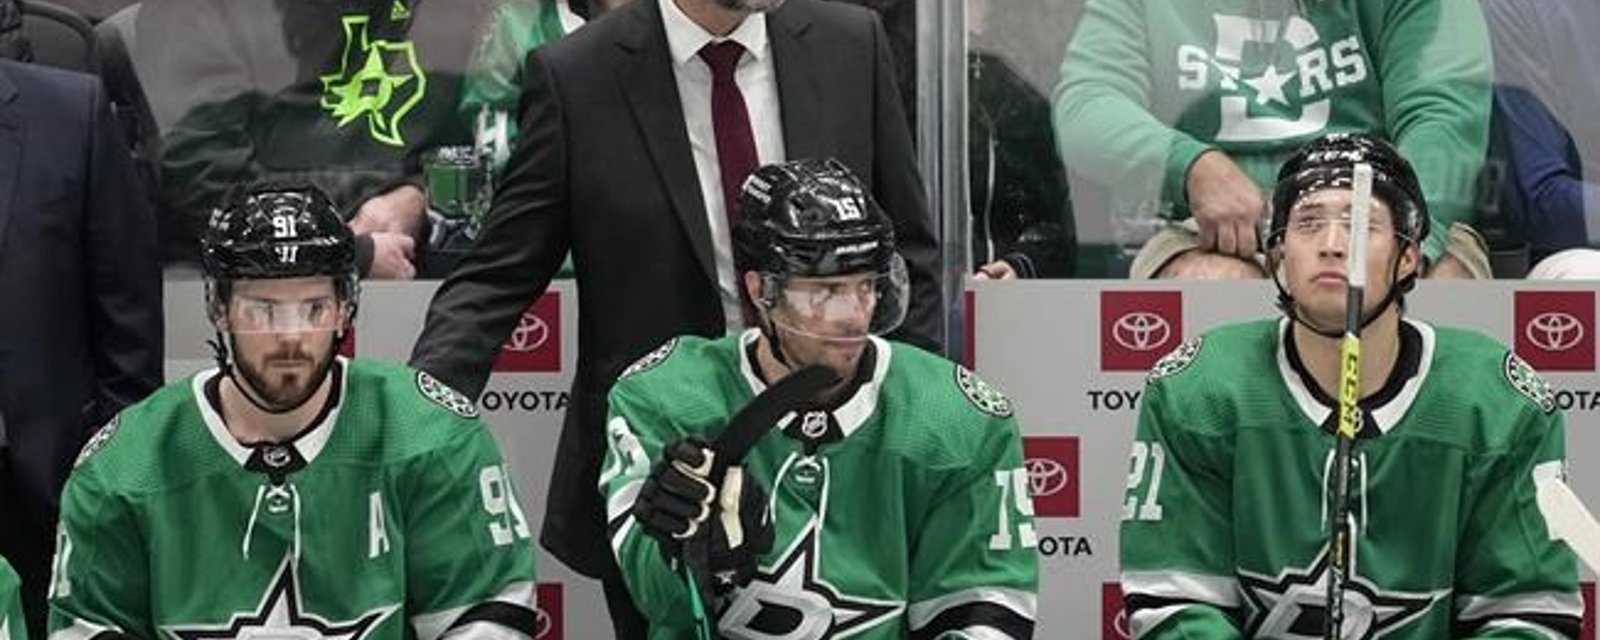 Stars forced to make significant lineup change ahead of Game 5